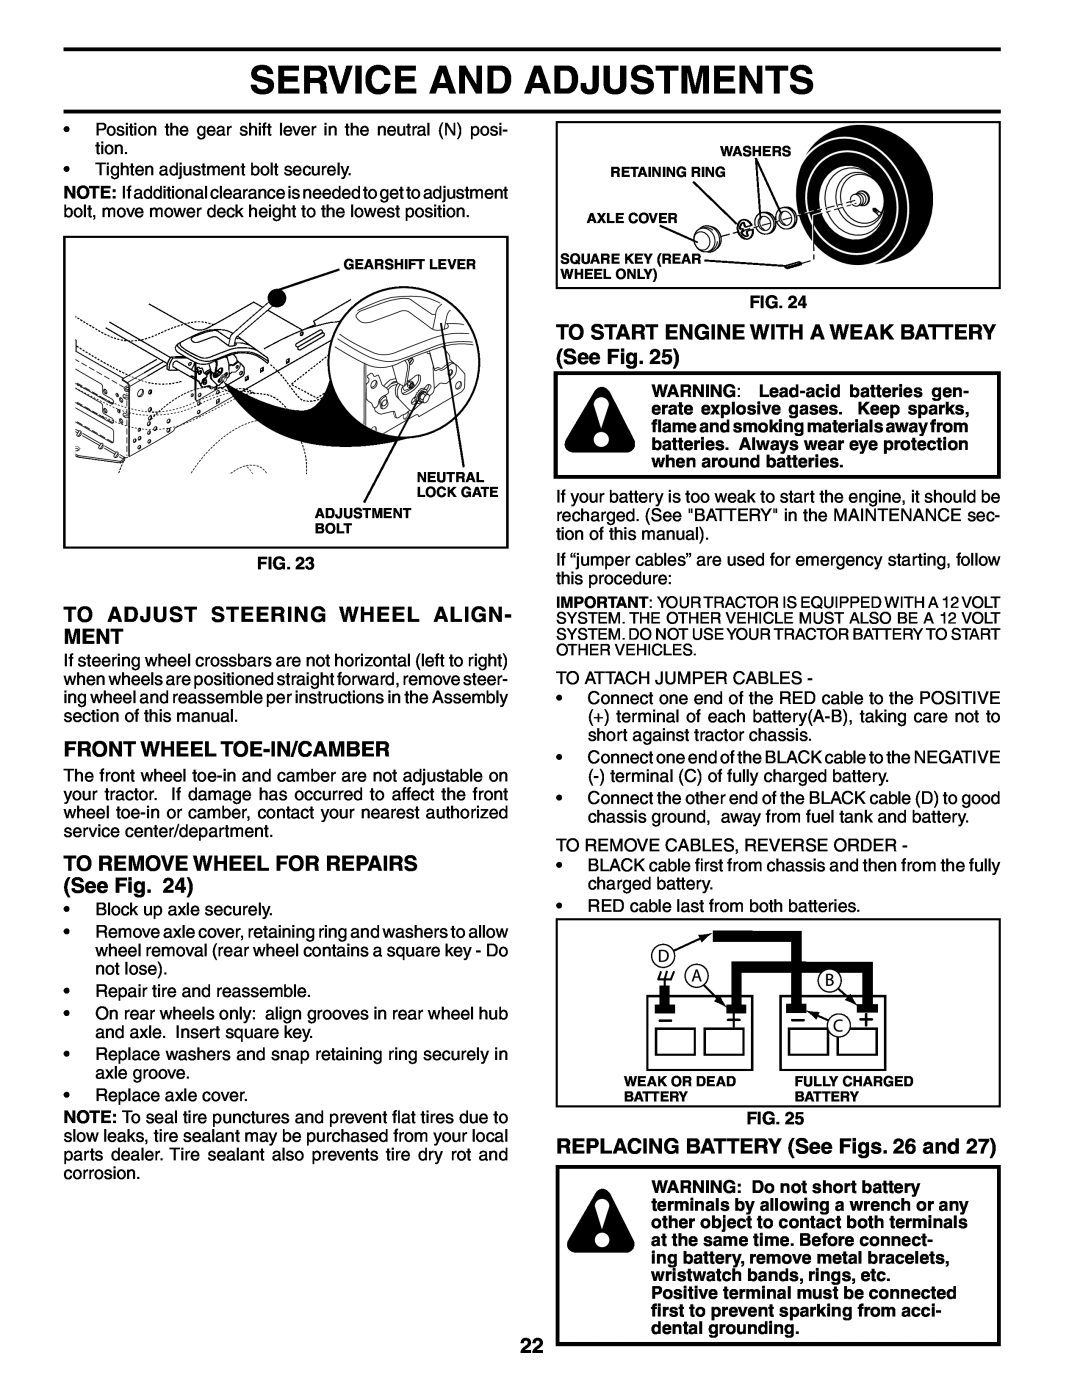 Poulan 954570932, 186888 manual TO START ENGINE WITH A WEAK BATTERY See Fig, To Adjust Steering Wheel Align- Ment 